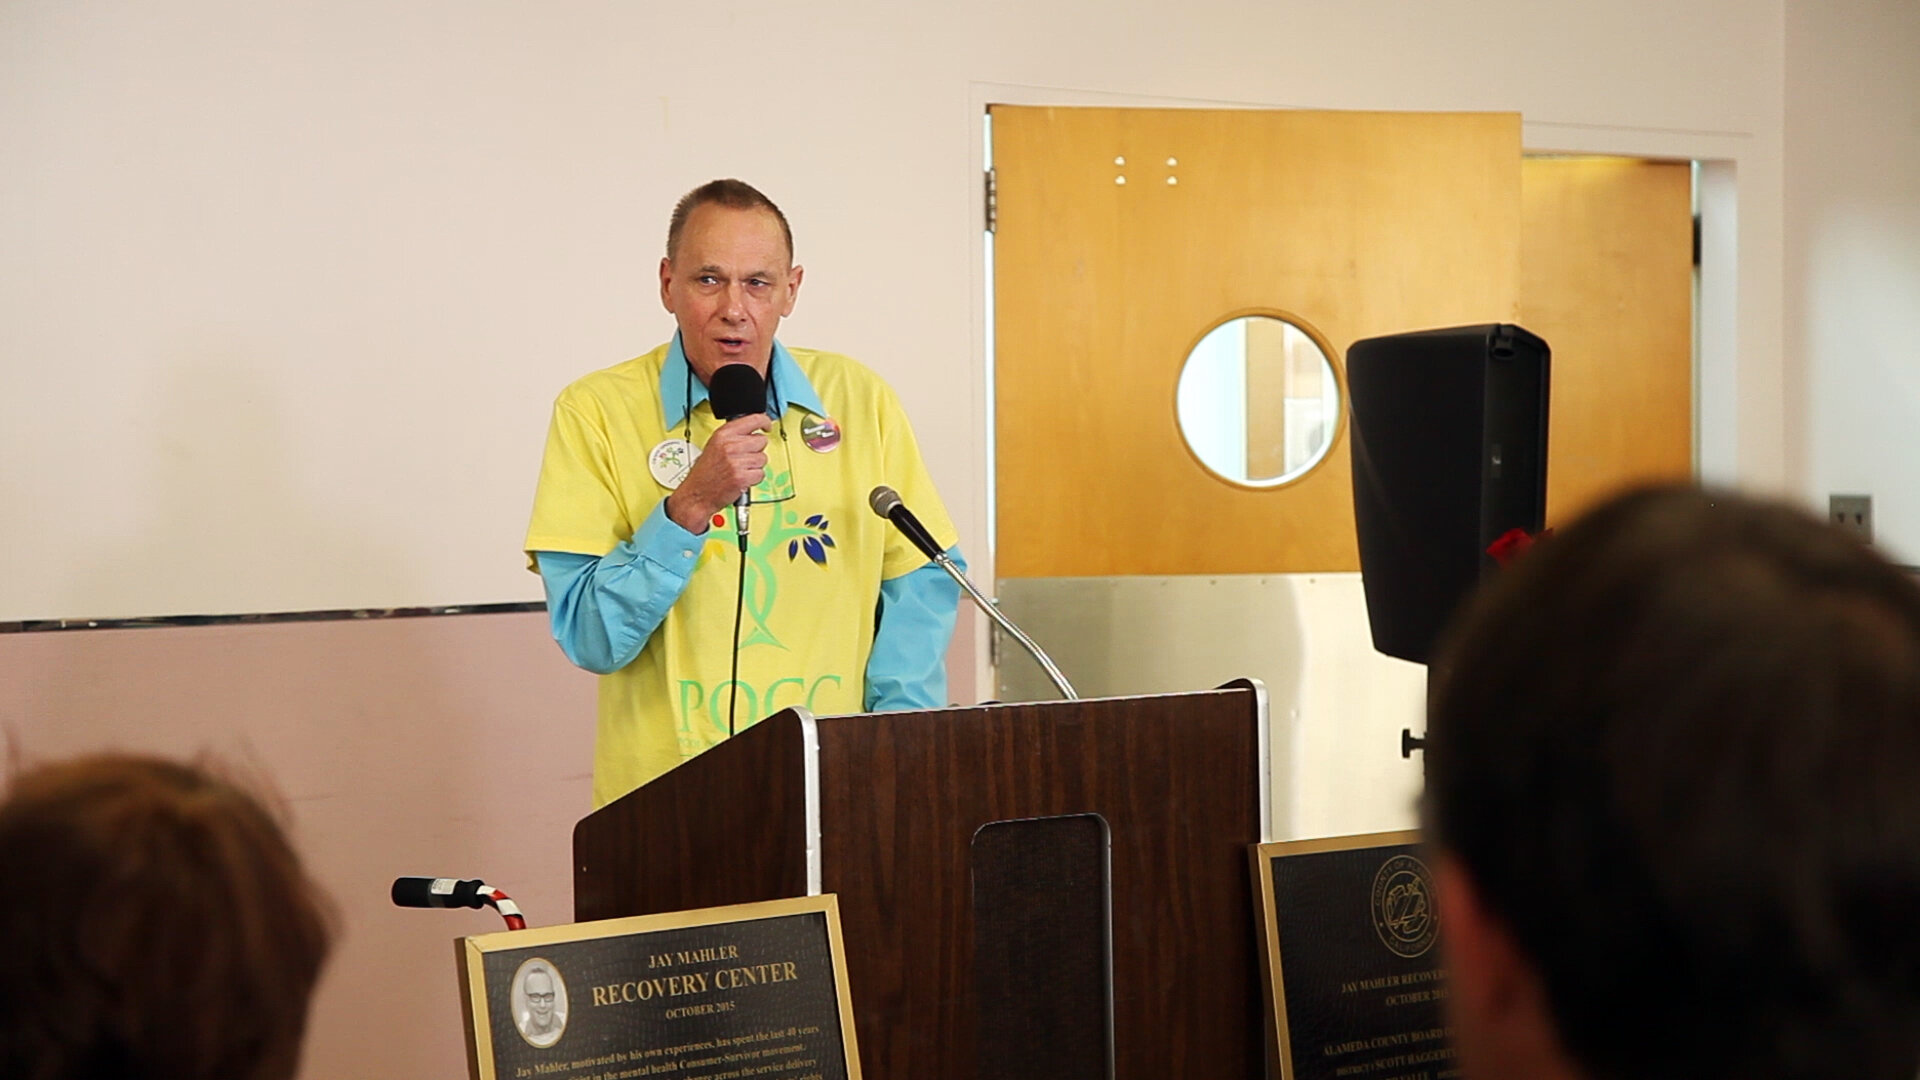 JAY MAHLER GIVING A SPEECH AT THE OPENING OF TELECARE'S JAY MAHLER RECOVERY CENTER ON OCTOBER 29.